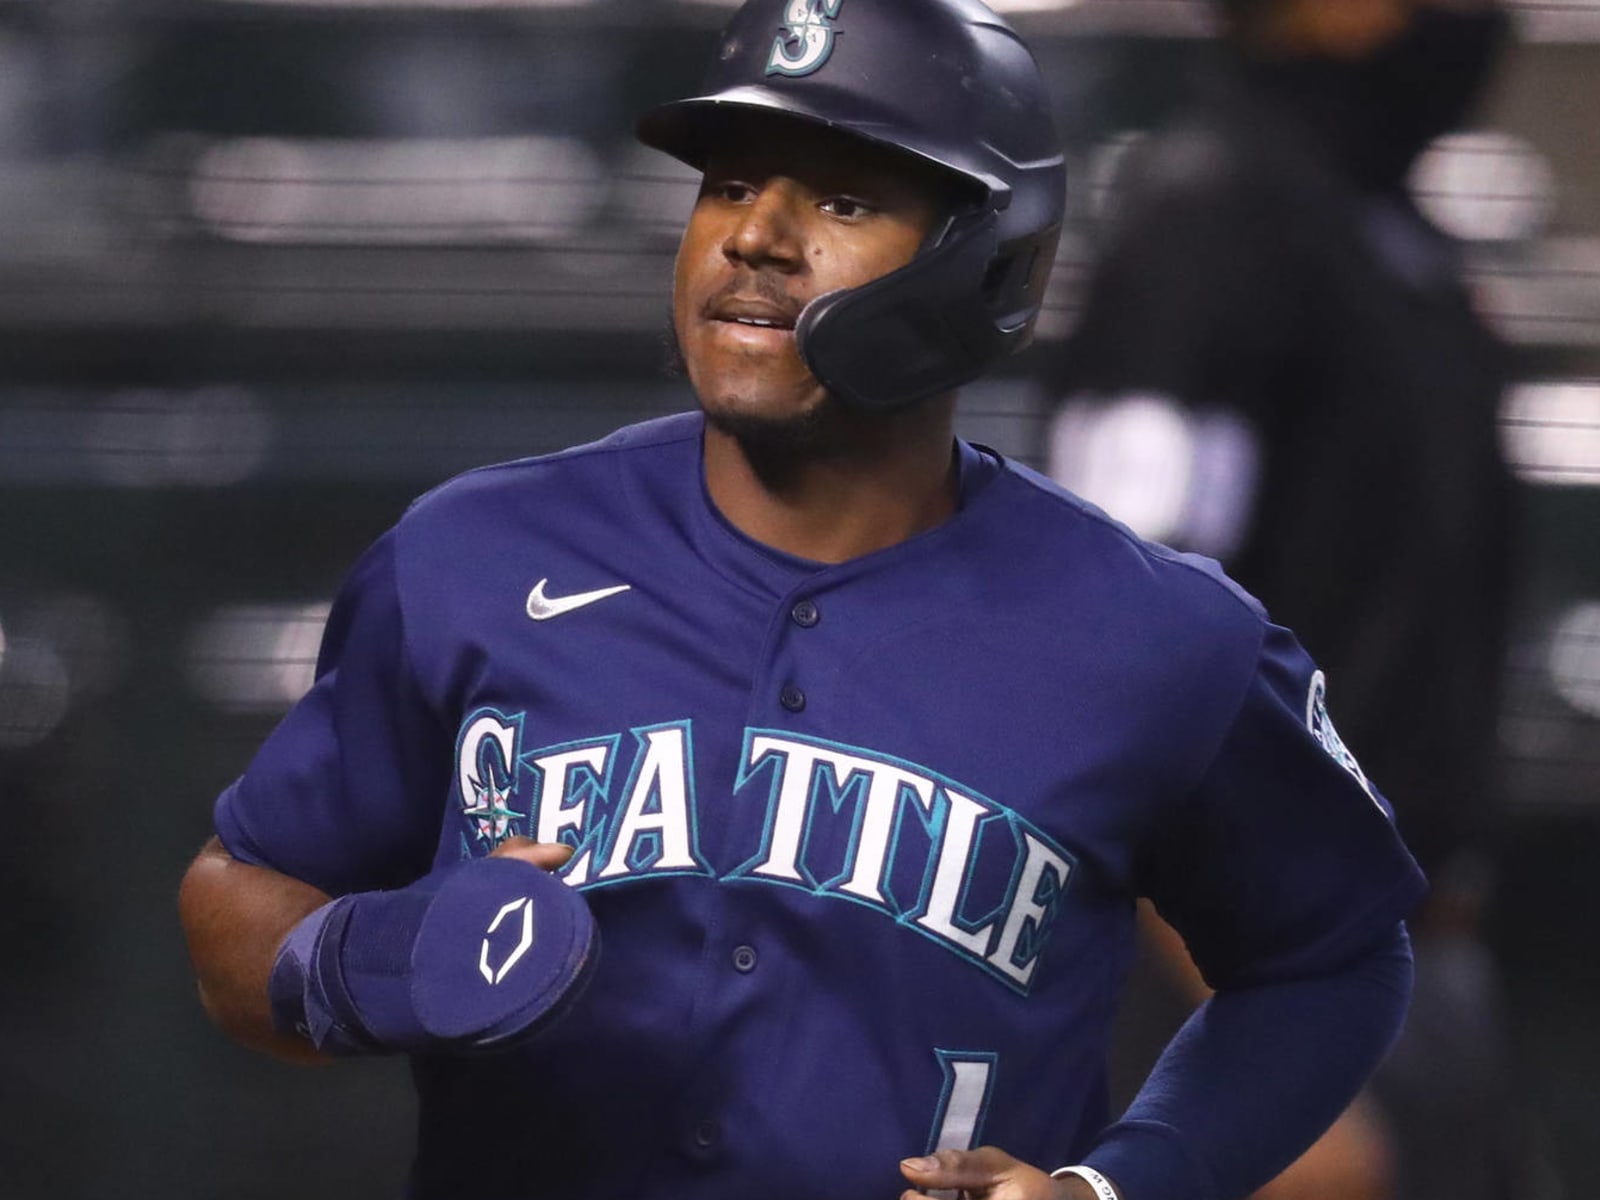 Kyle Lewis wins 2020 AL Rookie of the Year Award